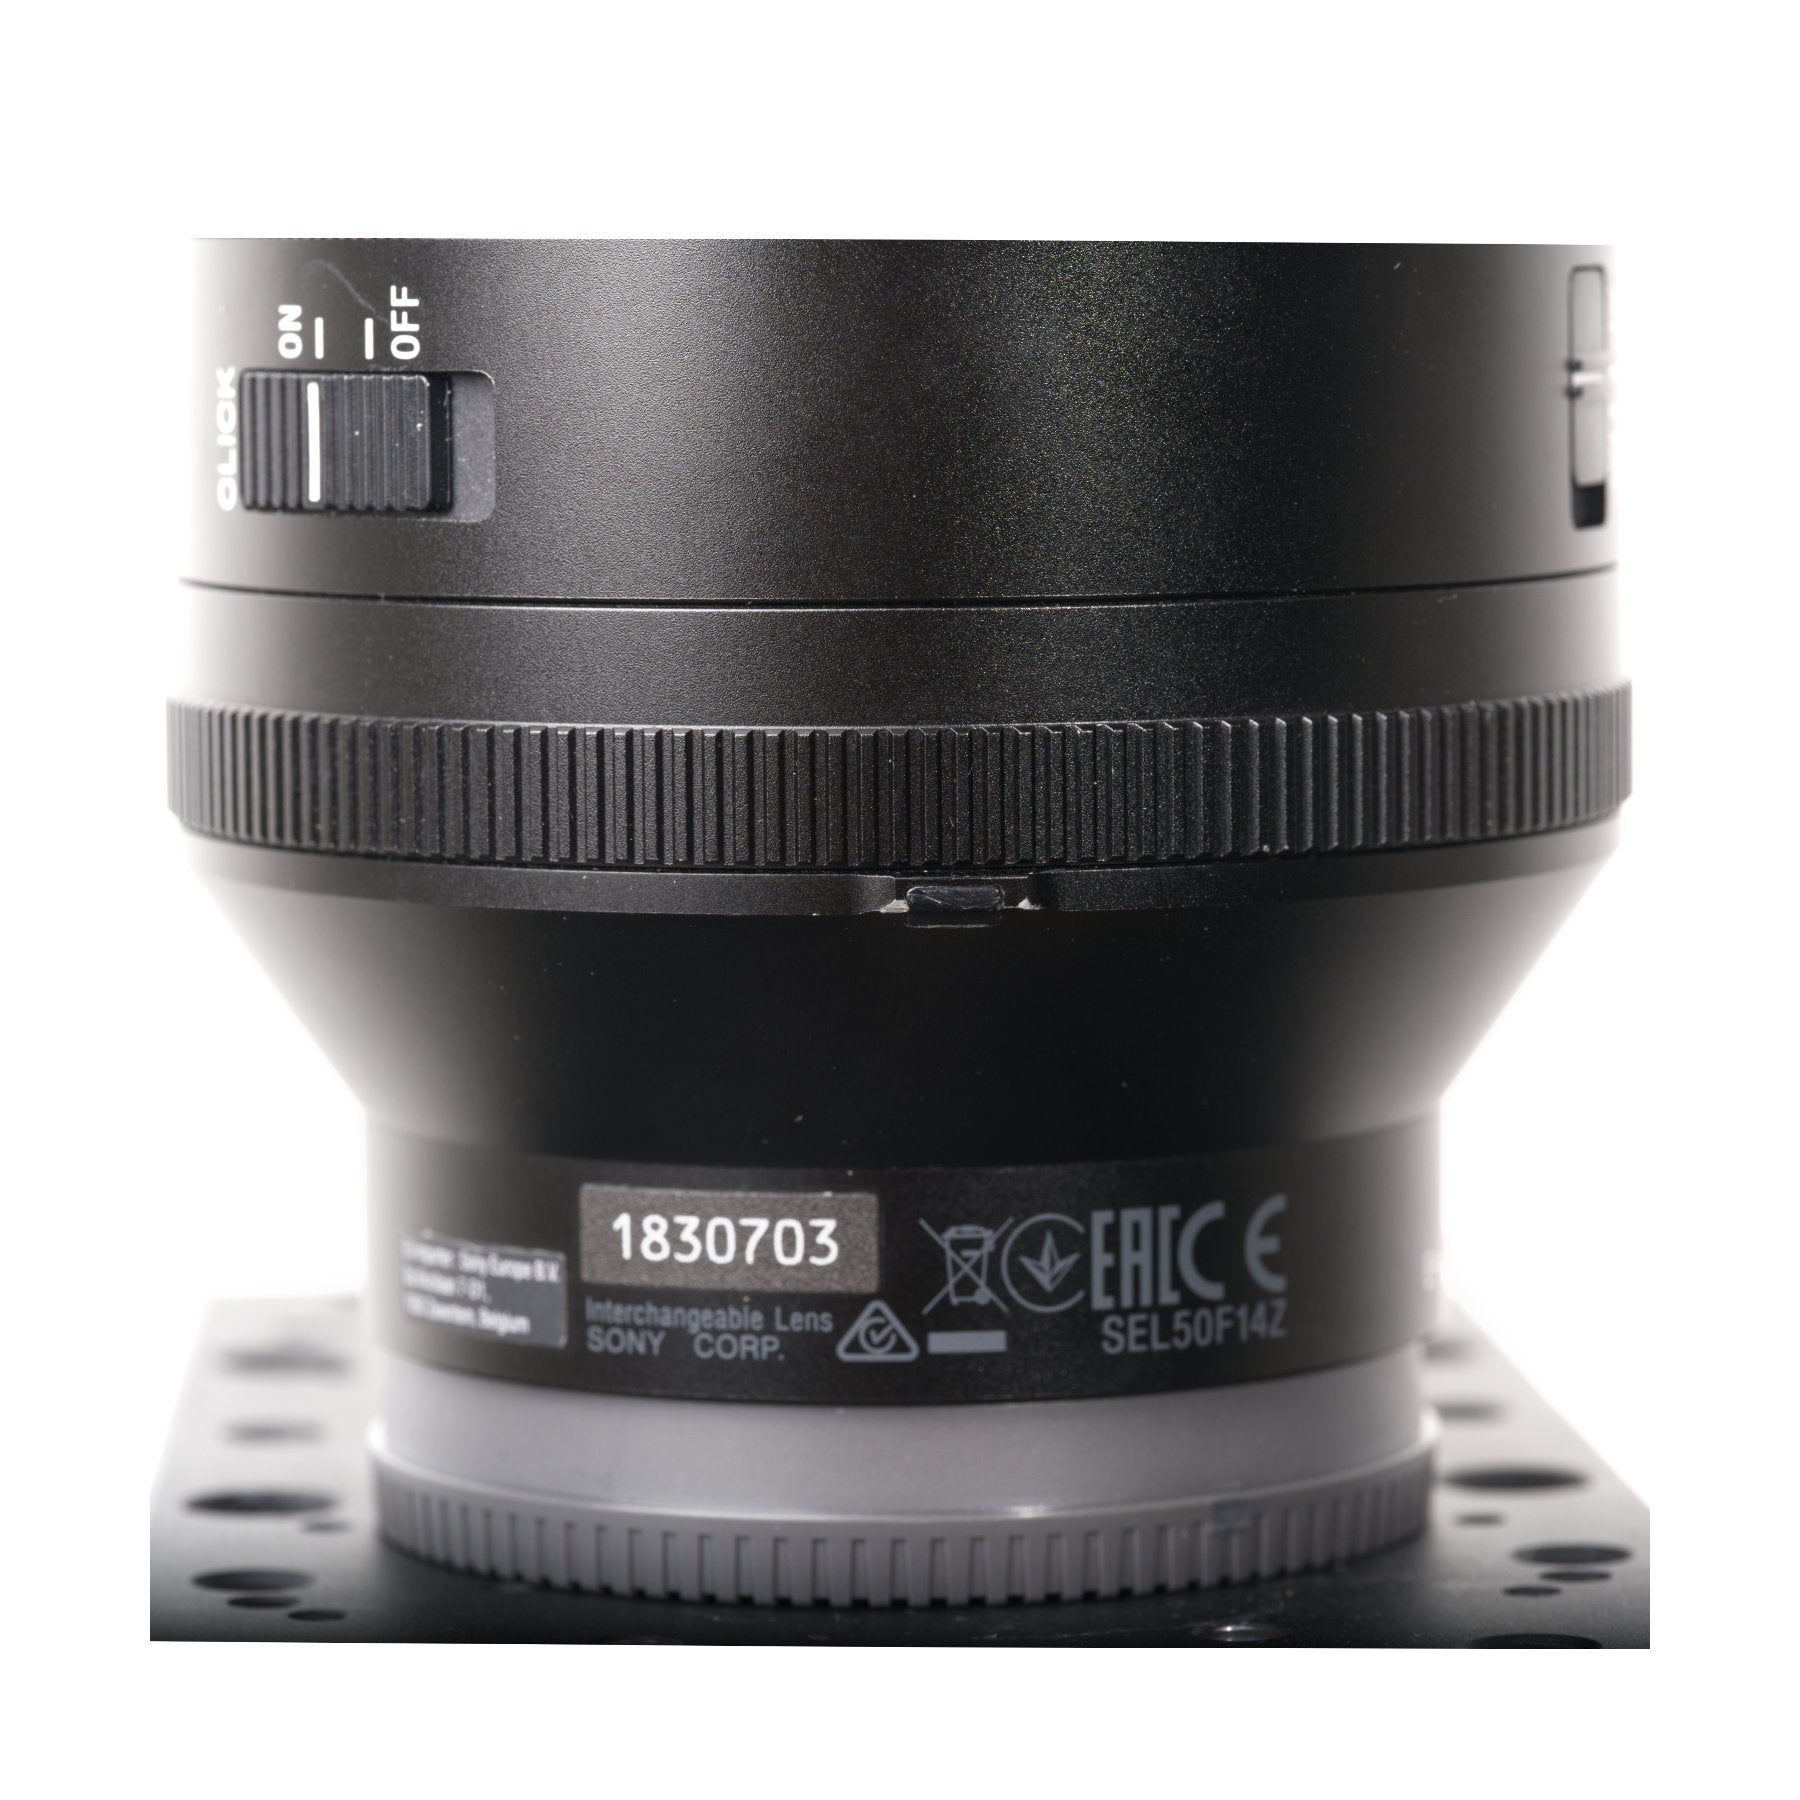 Buy second hand Sony Zeiss Planar T* FE 50mm f/1.4 ZA Lens at Topic Store